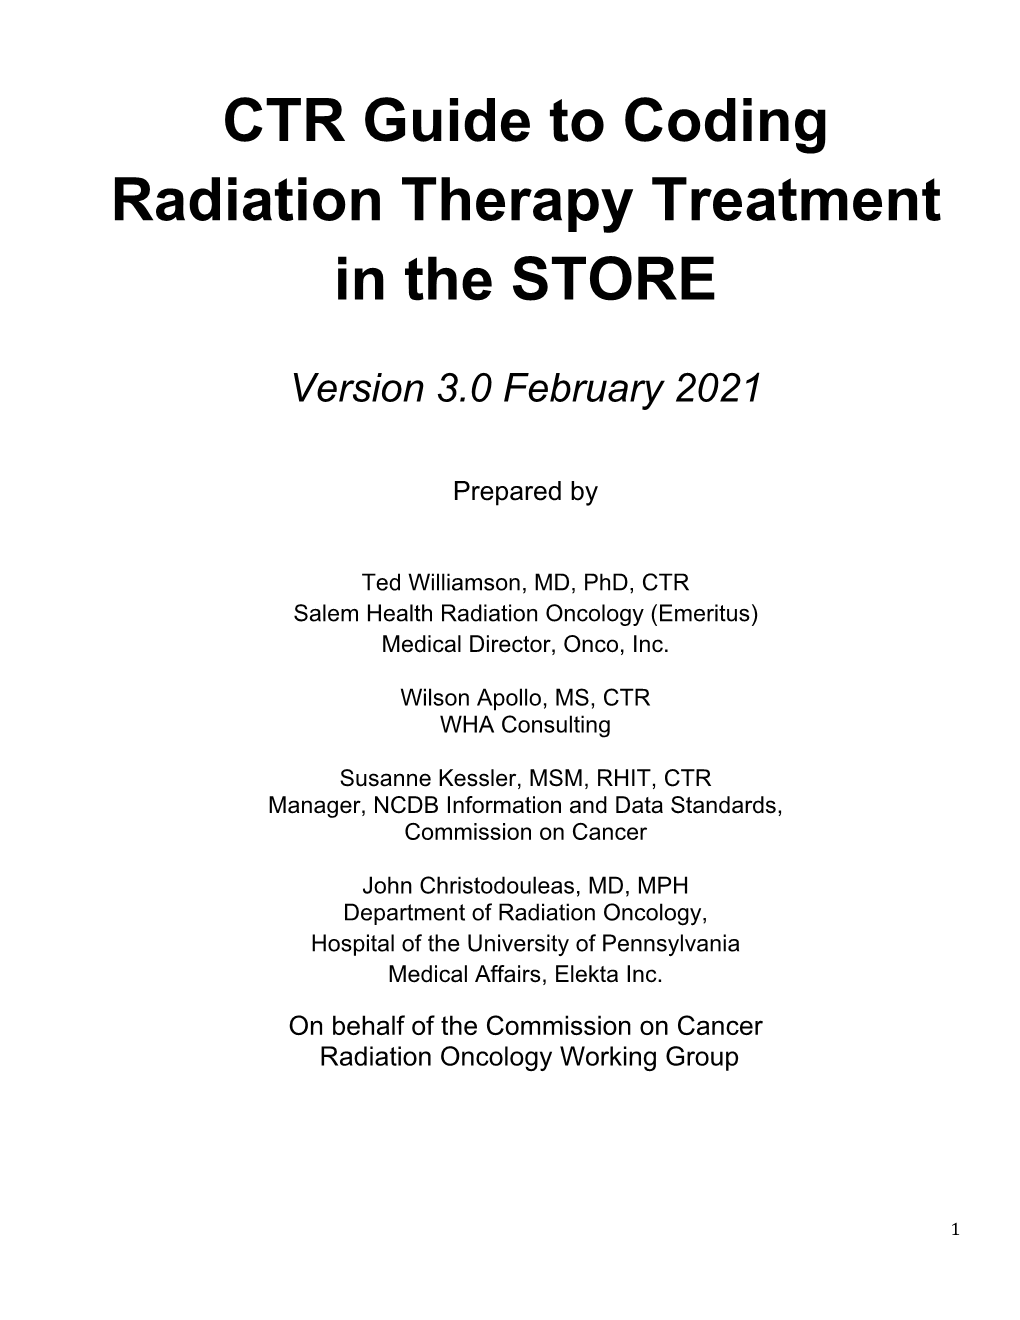 CTR Guide to Coding Radiation Therapy Treatment in the STORE DocsLib